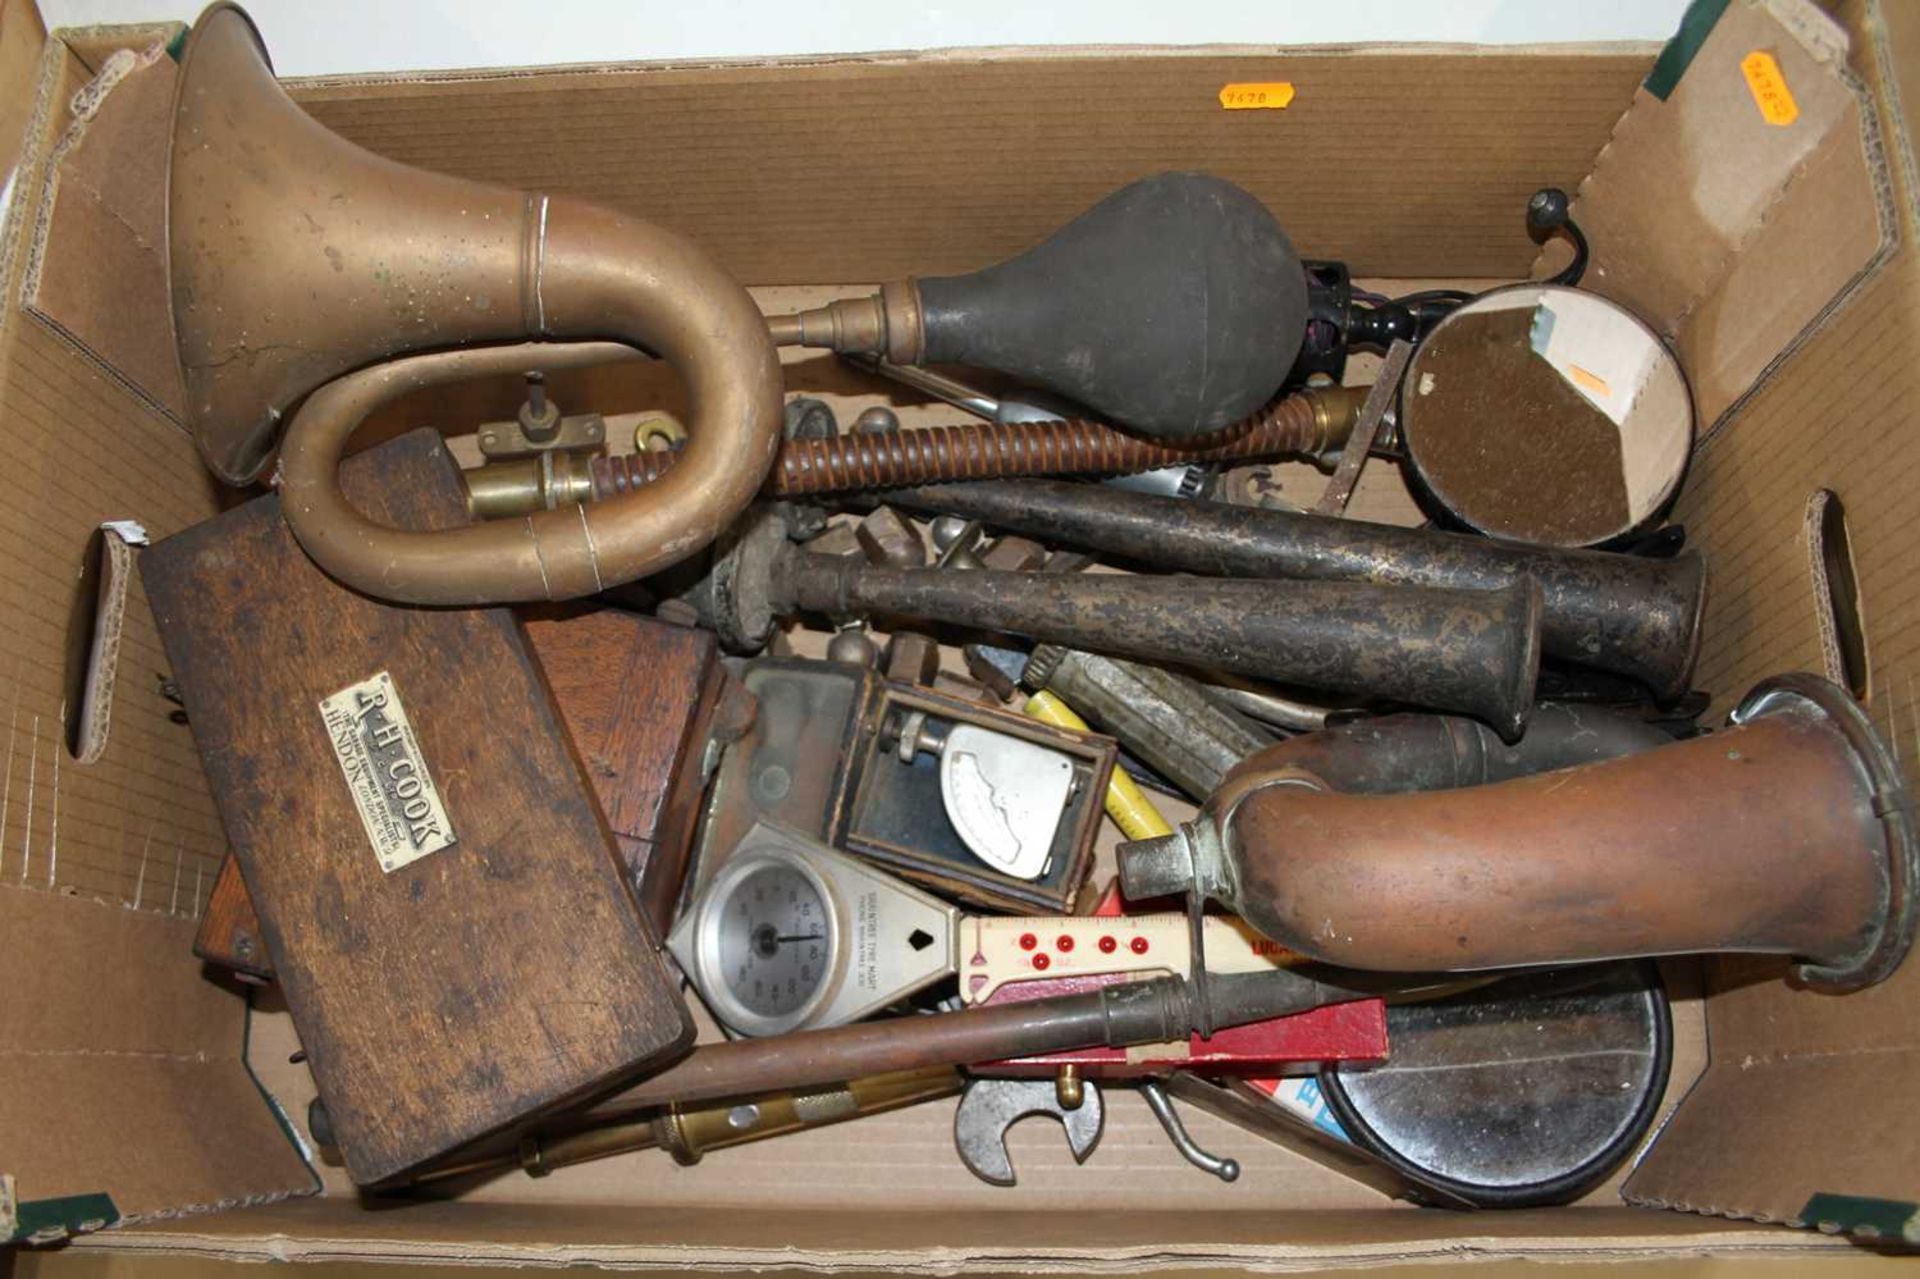 Vintage car parts, to include brass horn, sundry instruments, Austin Rover steering wheel etc - Image 2 of 2